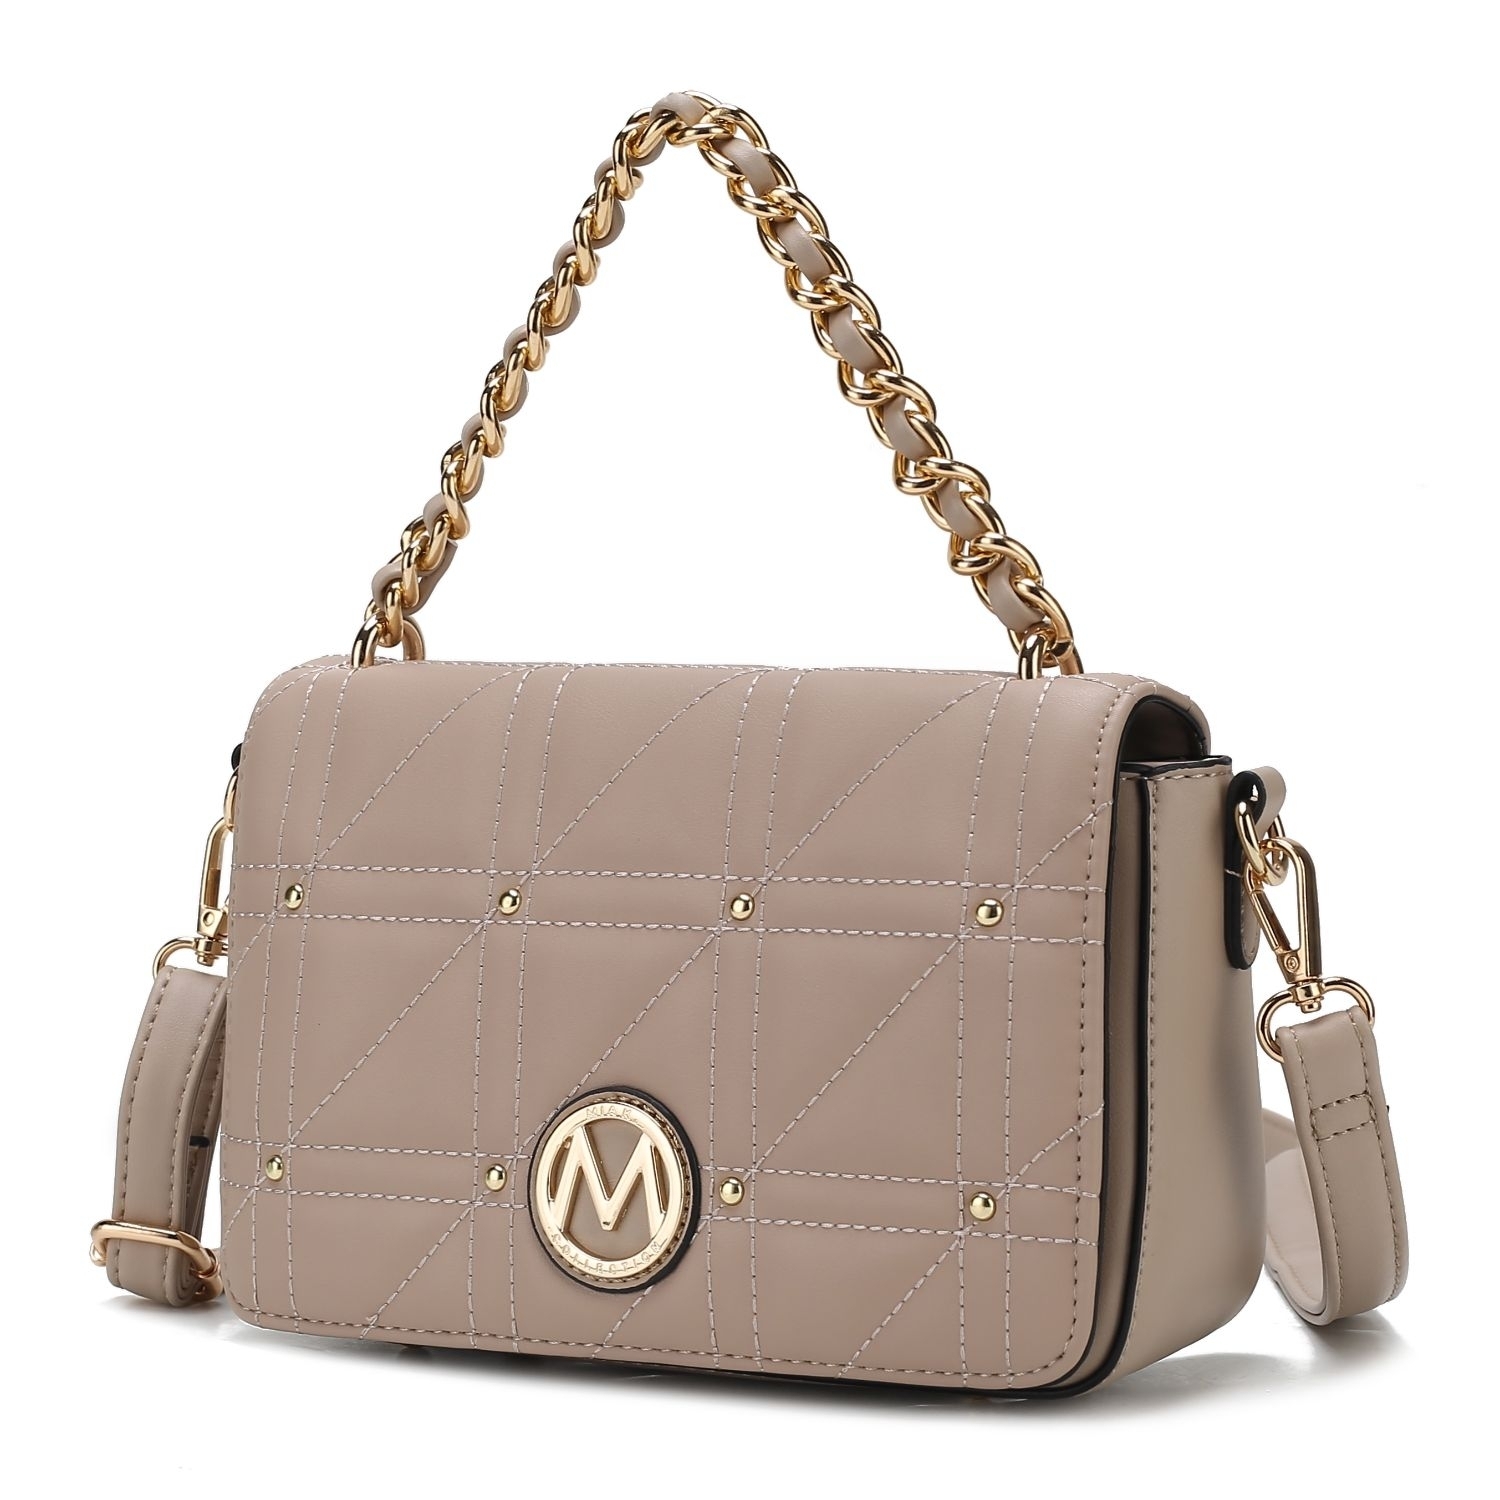 MKF Collection Arabella Vegan Leather Women's Shoulder Bag By Mia K - Taupe